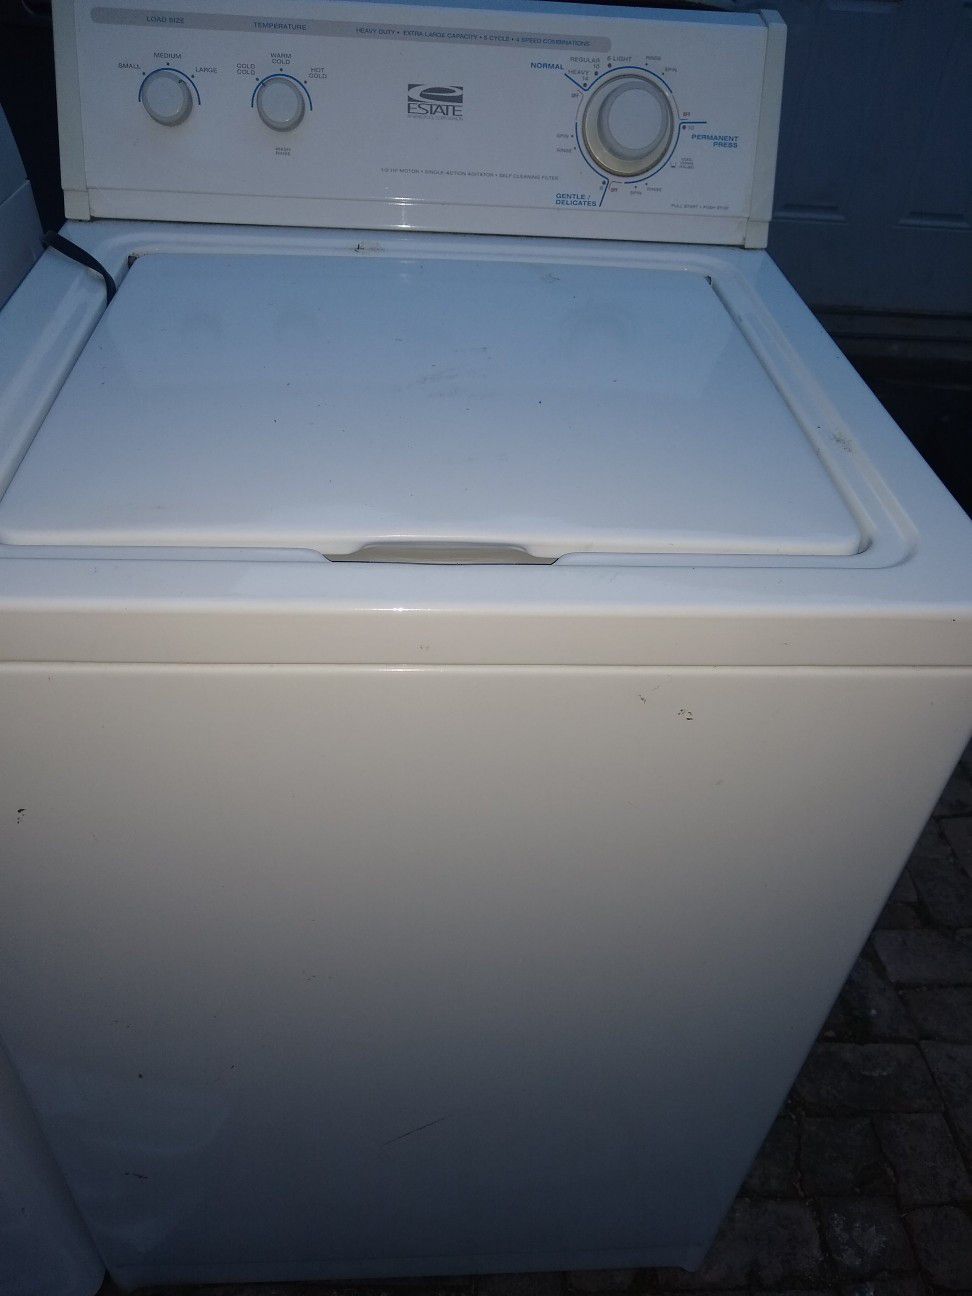 Estate washer good working condition in Columbia $160.00